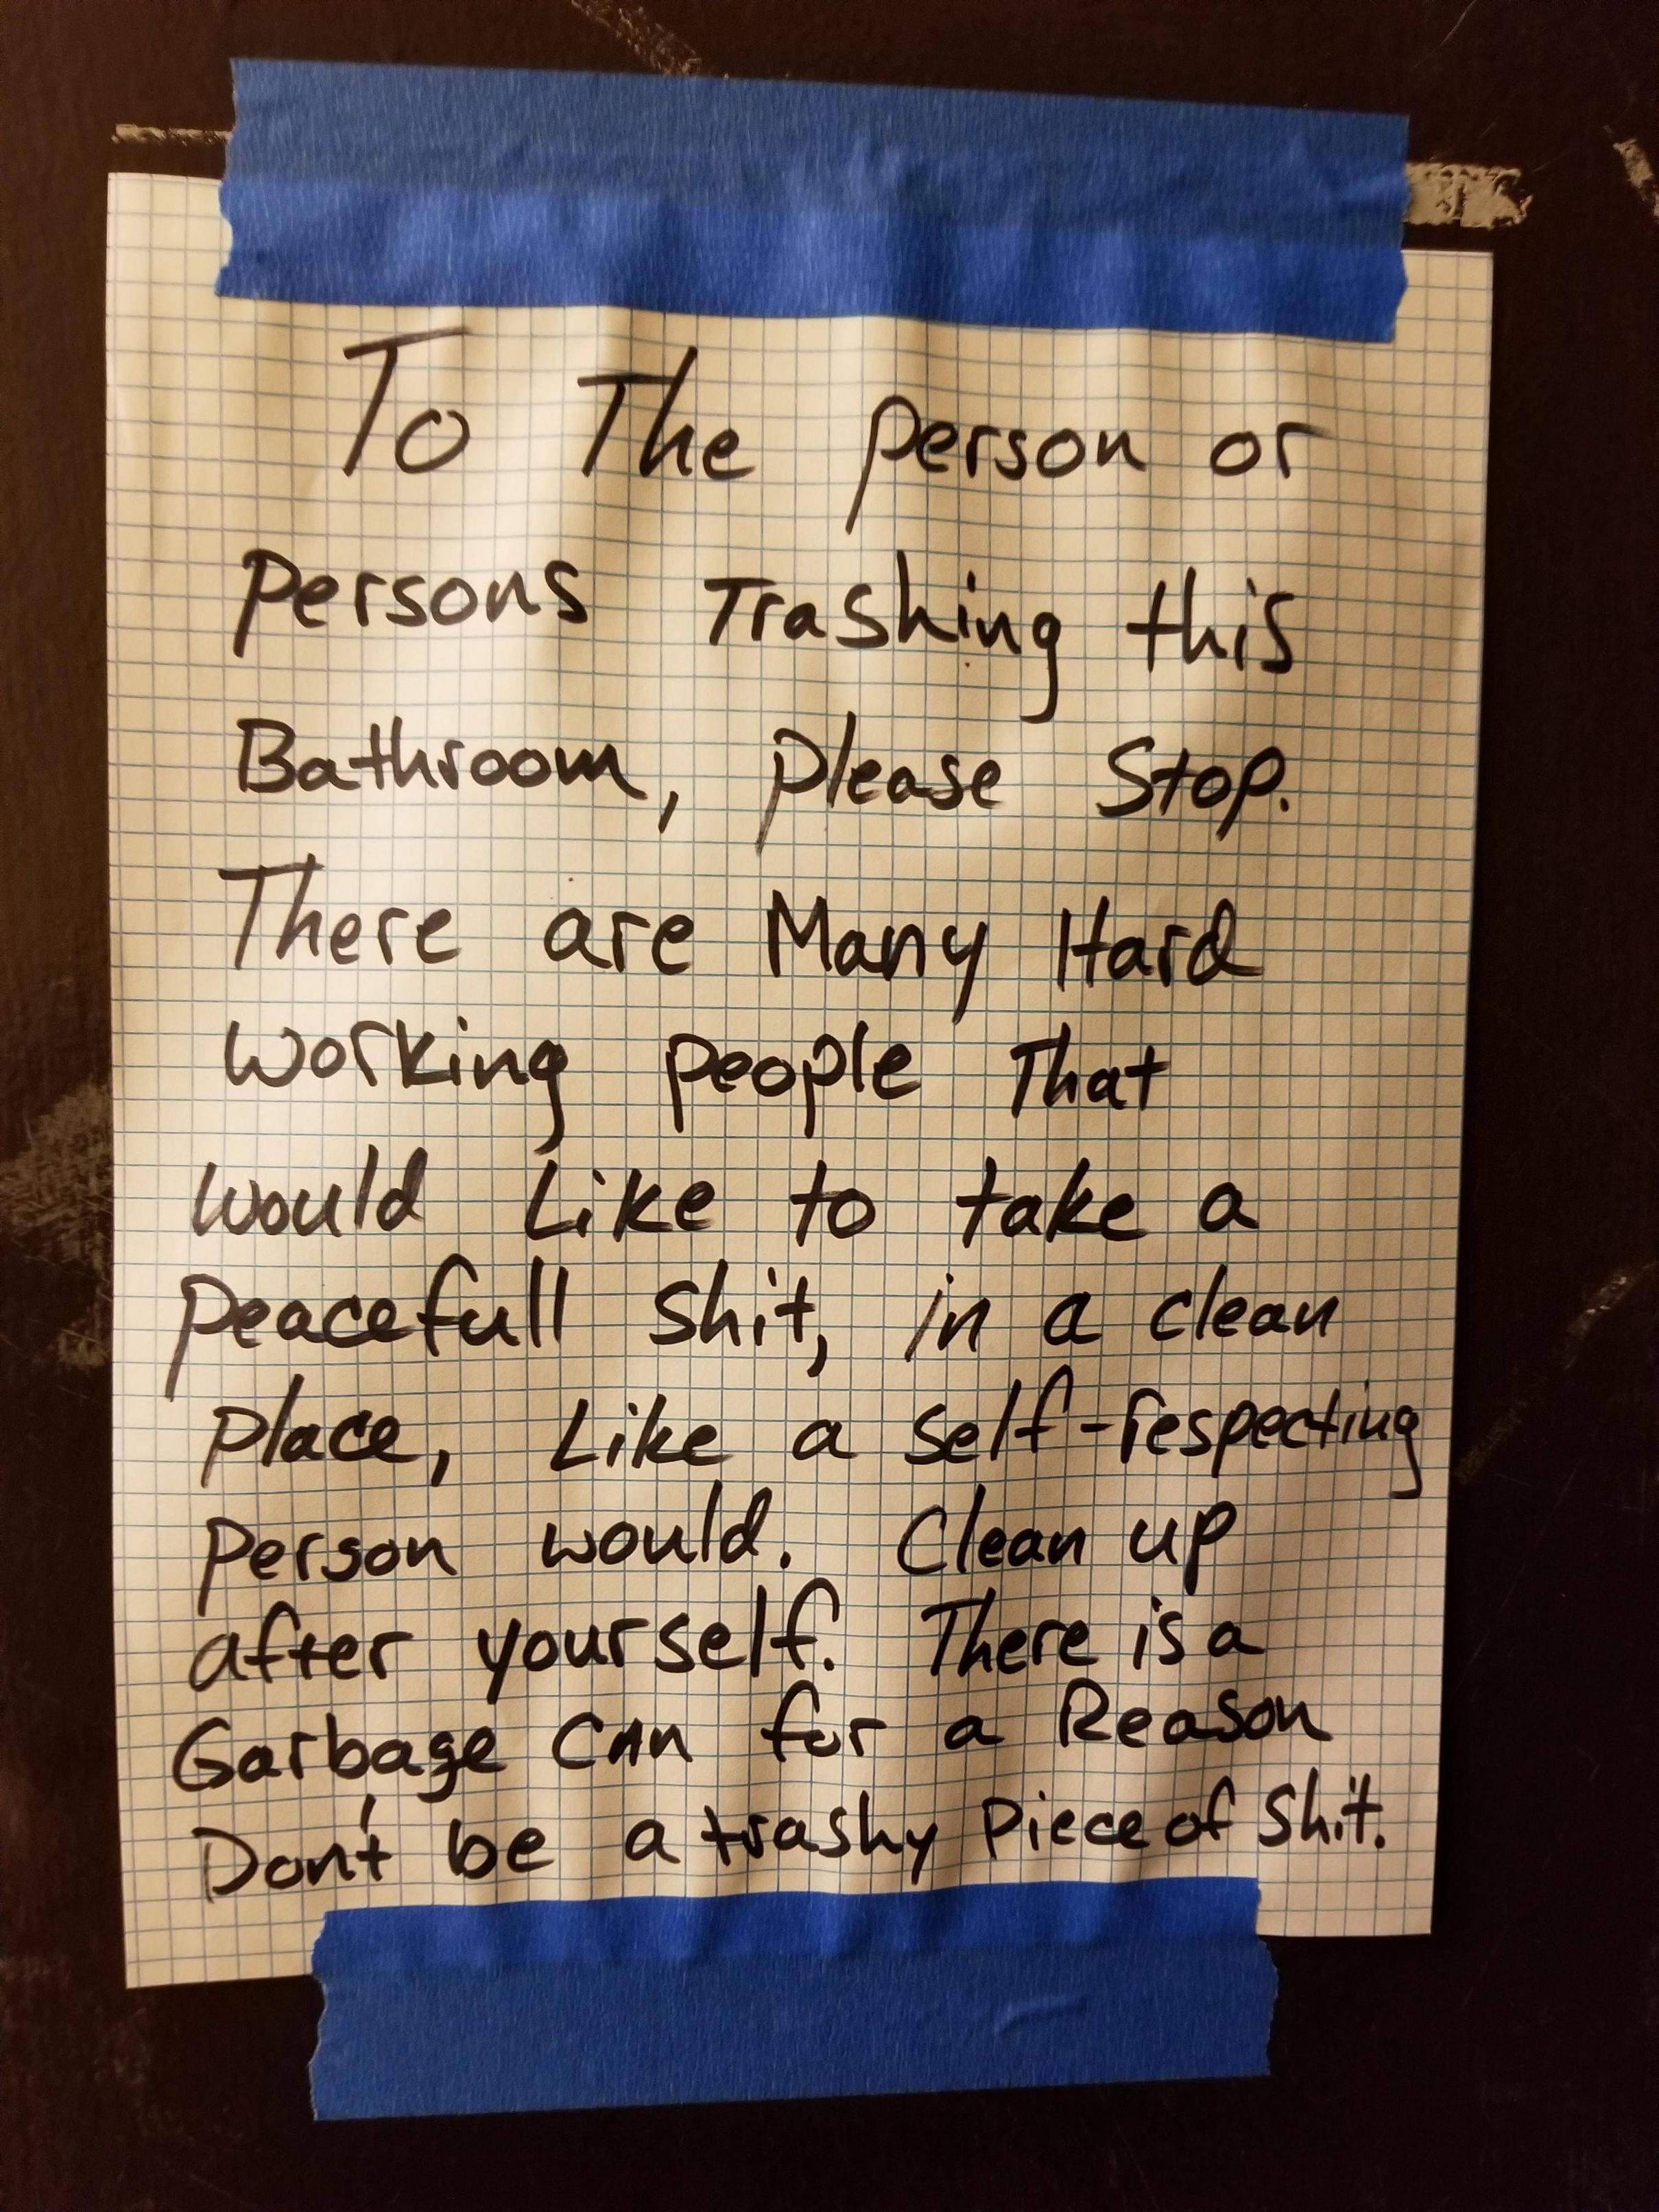 handwriting - To The person or persons Trashing this Bathroom, please Stop. There are many Hard working people that would to take a Peacefull shit, in a clean place, a selfrespecting person would. Clean up after yourself. There is a Garbage can for a Reas